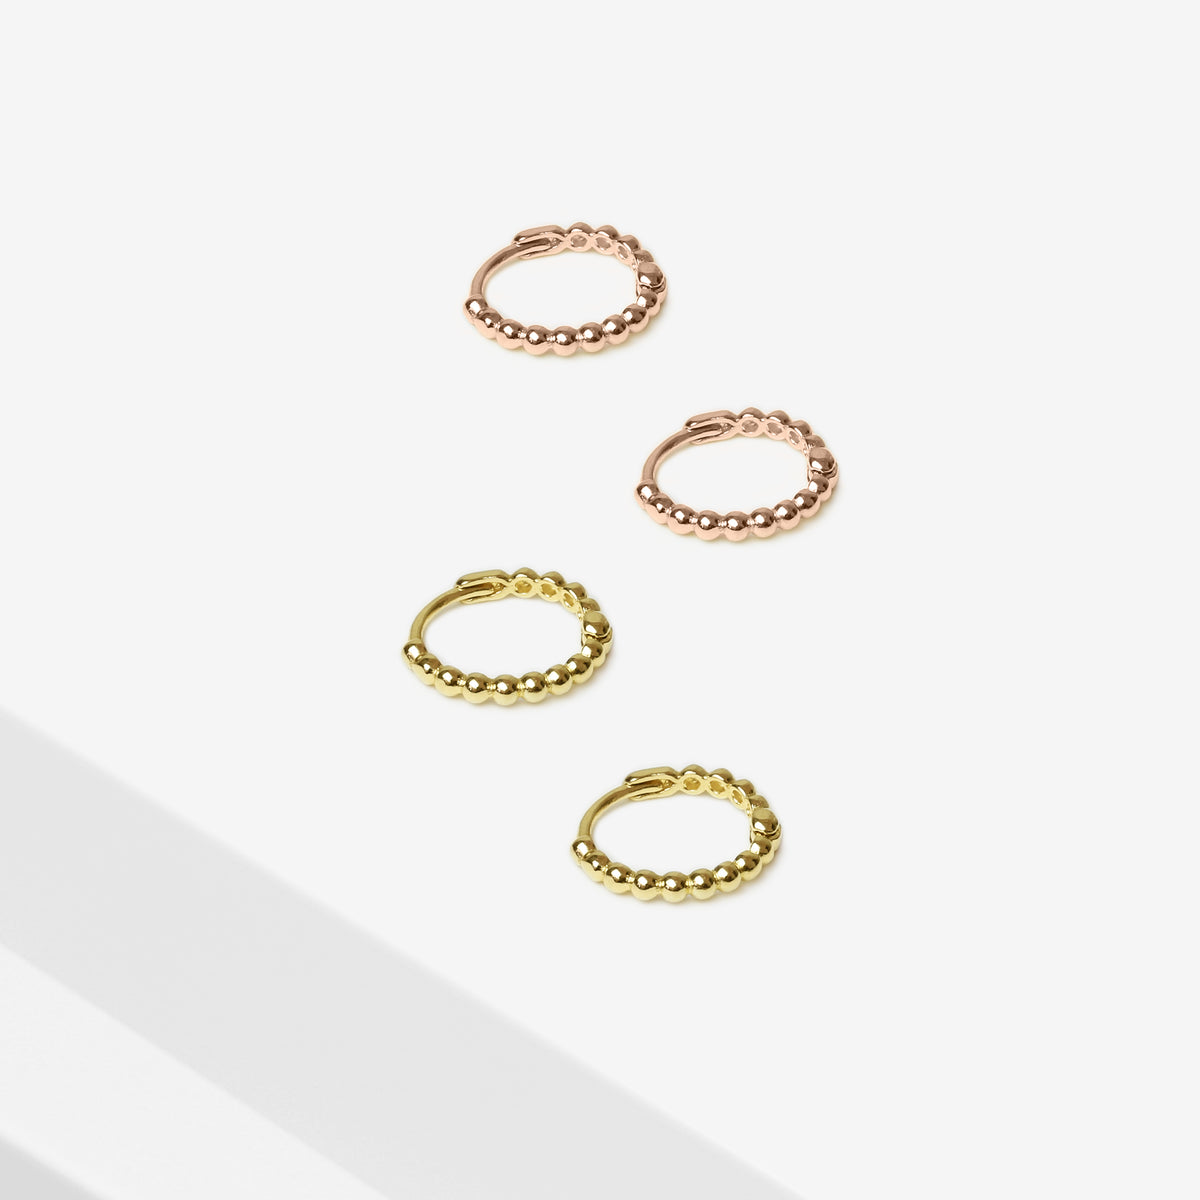 14k Solid Gold Small Ball Hoop Earring – a day like